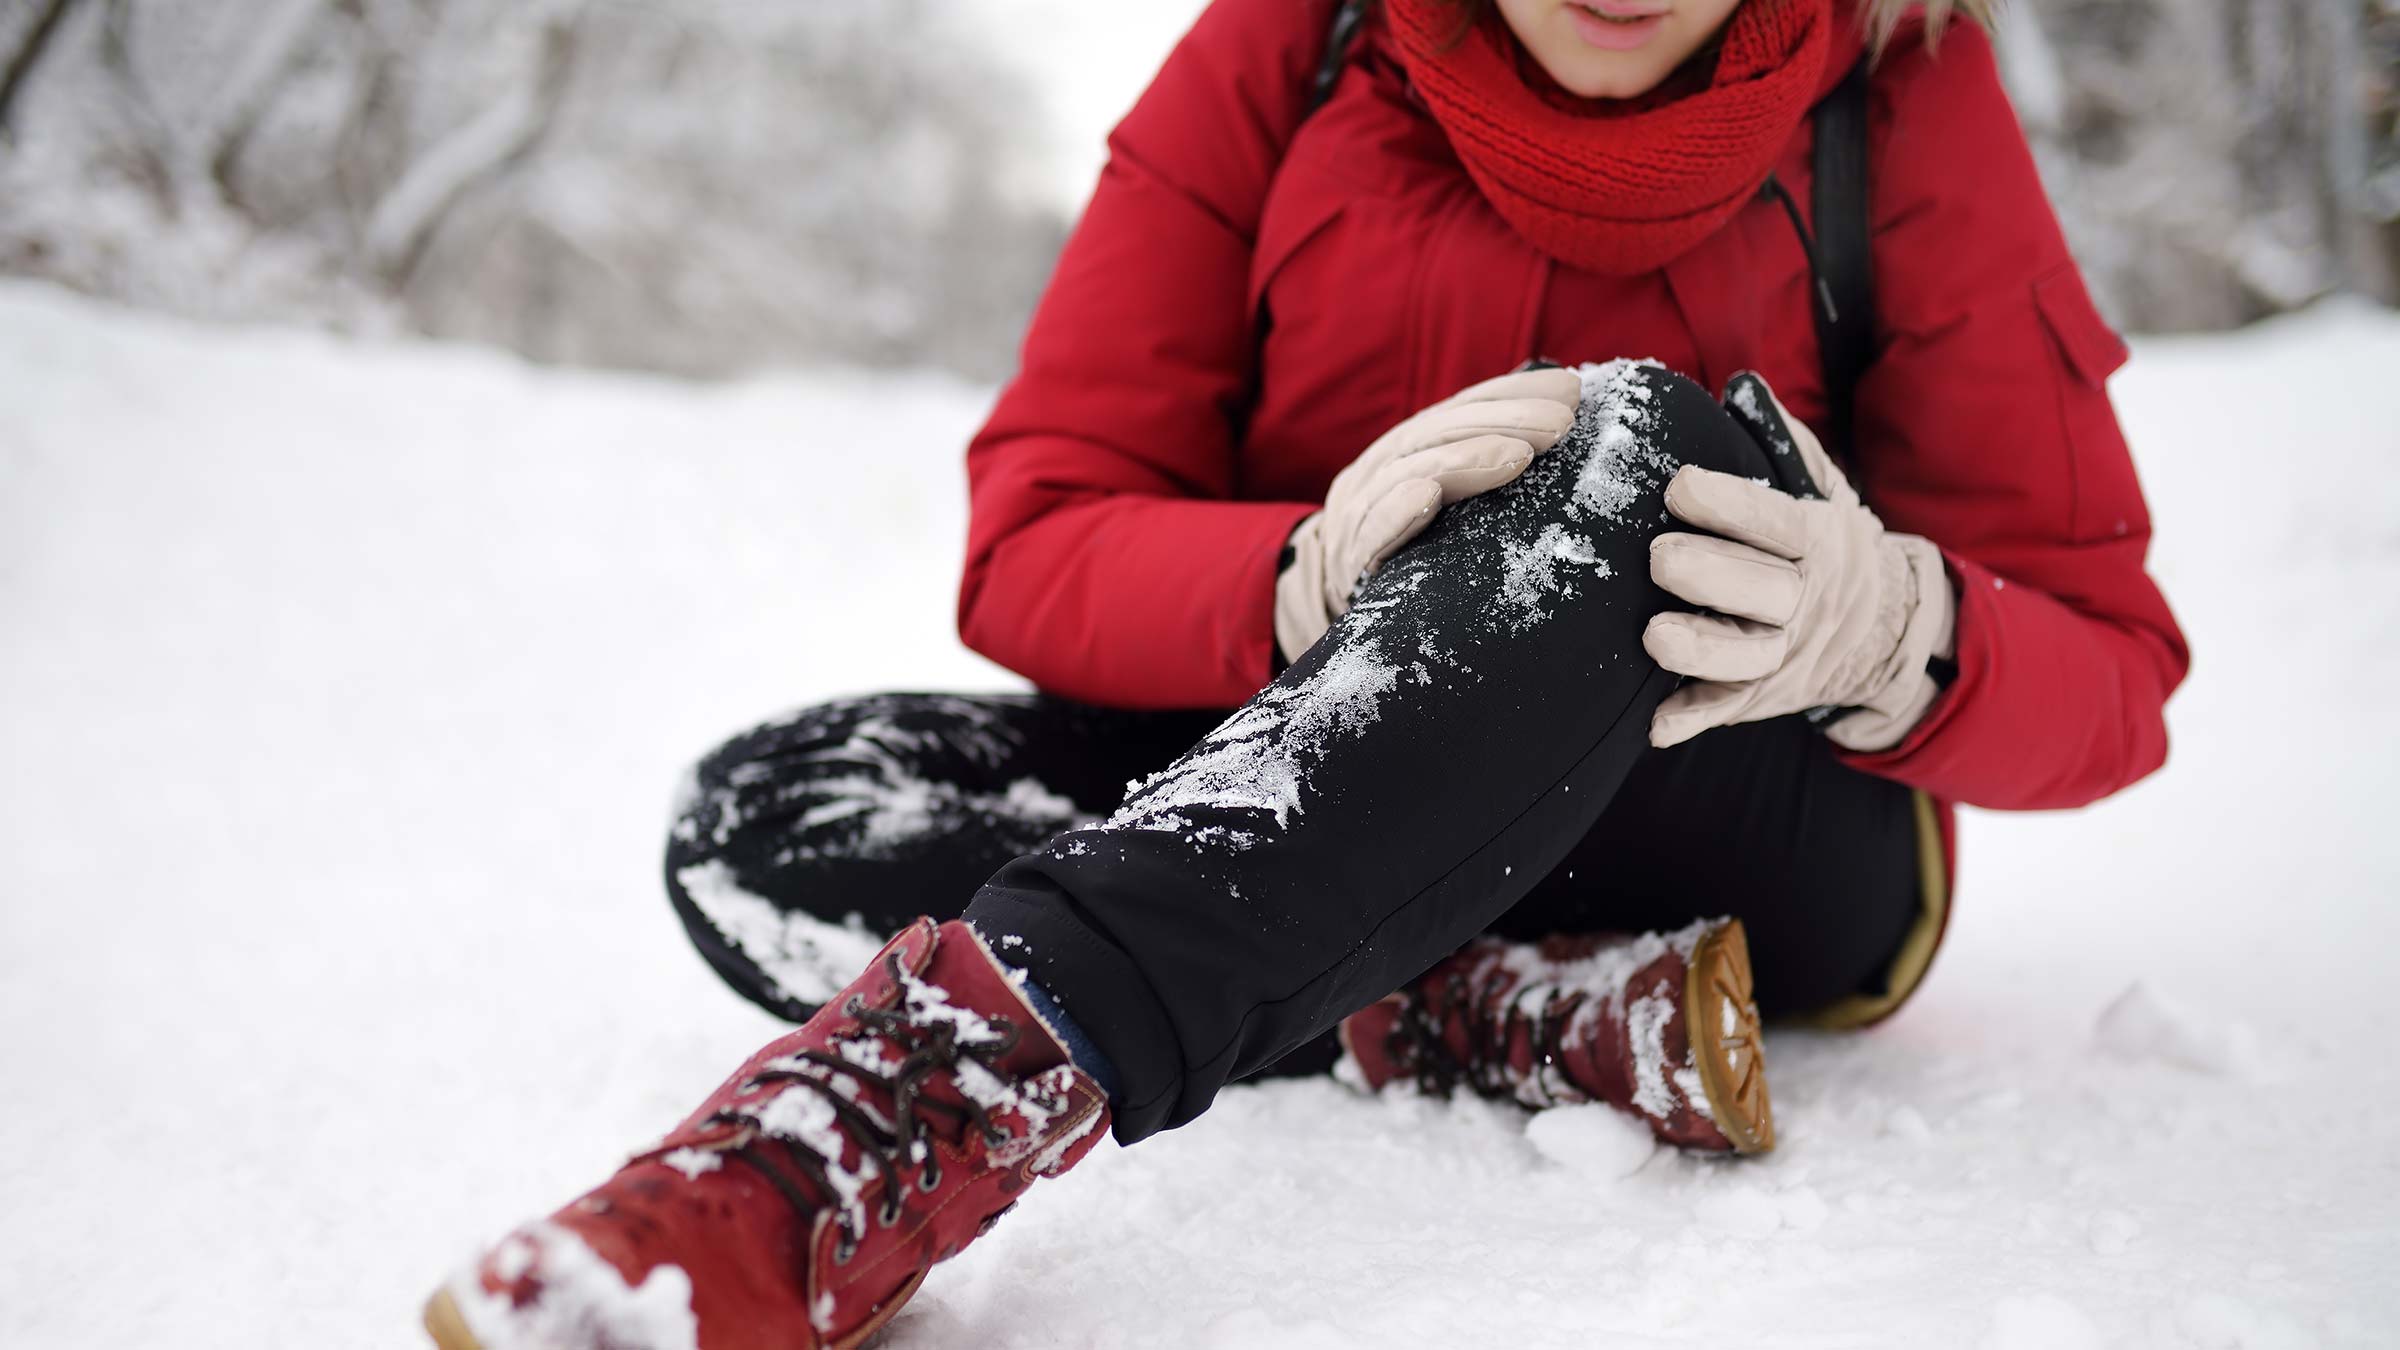 Woman sitting on a snow holding her knee